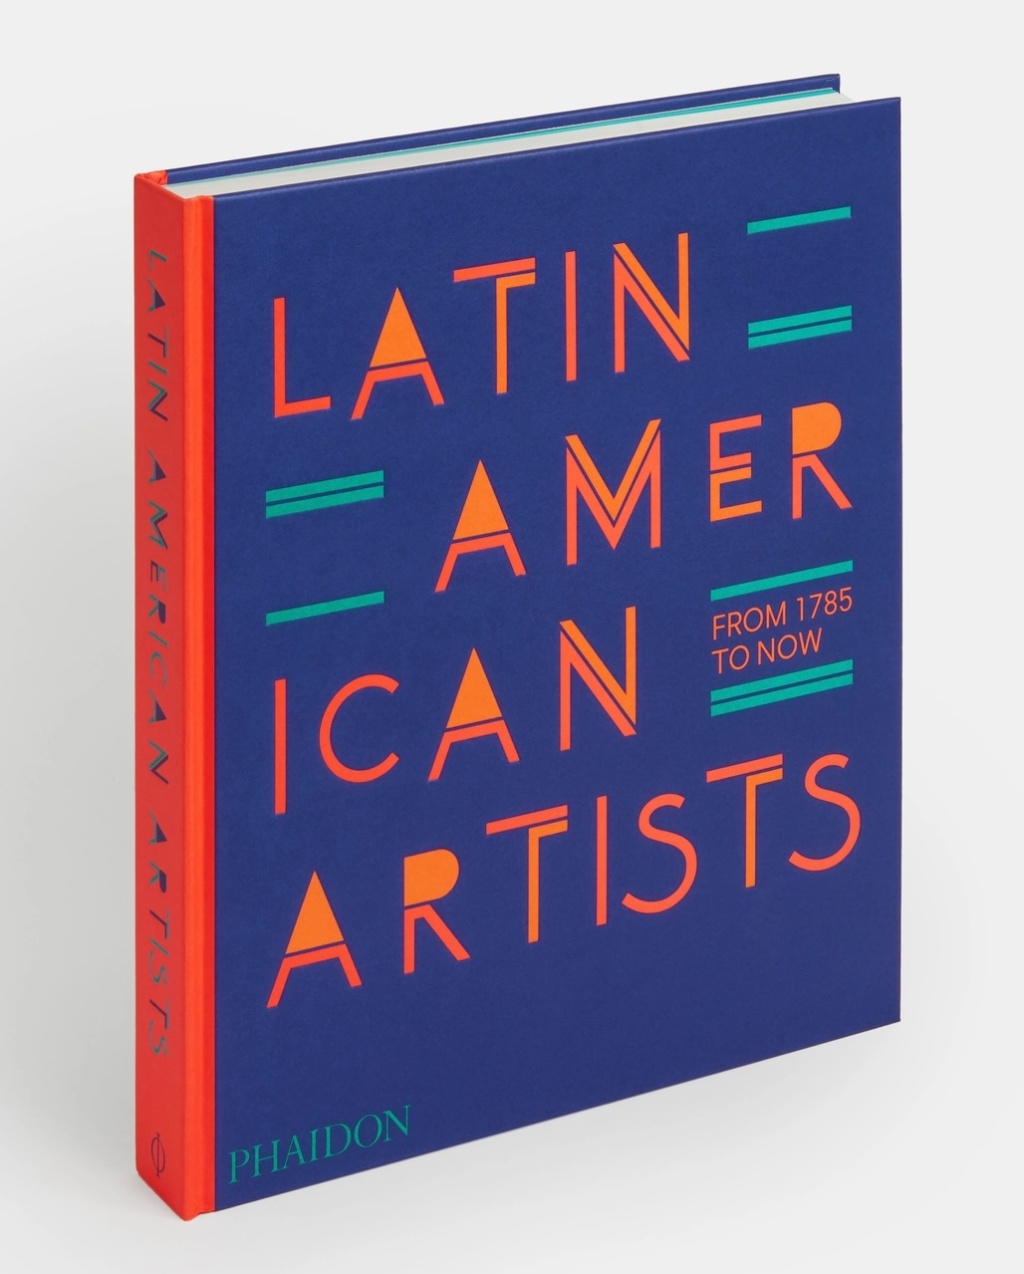 Latin American Artists: From 1785 to Now